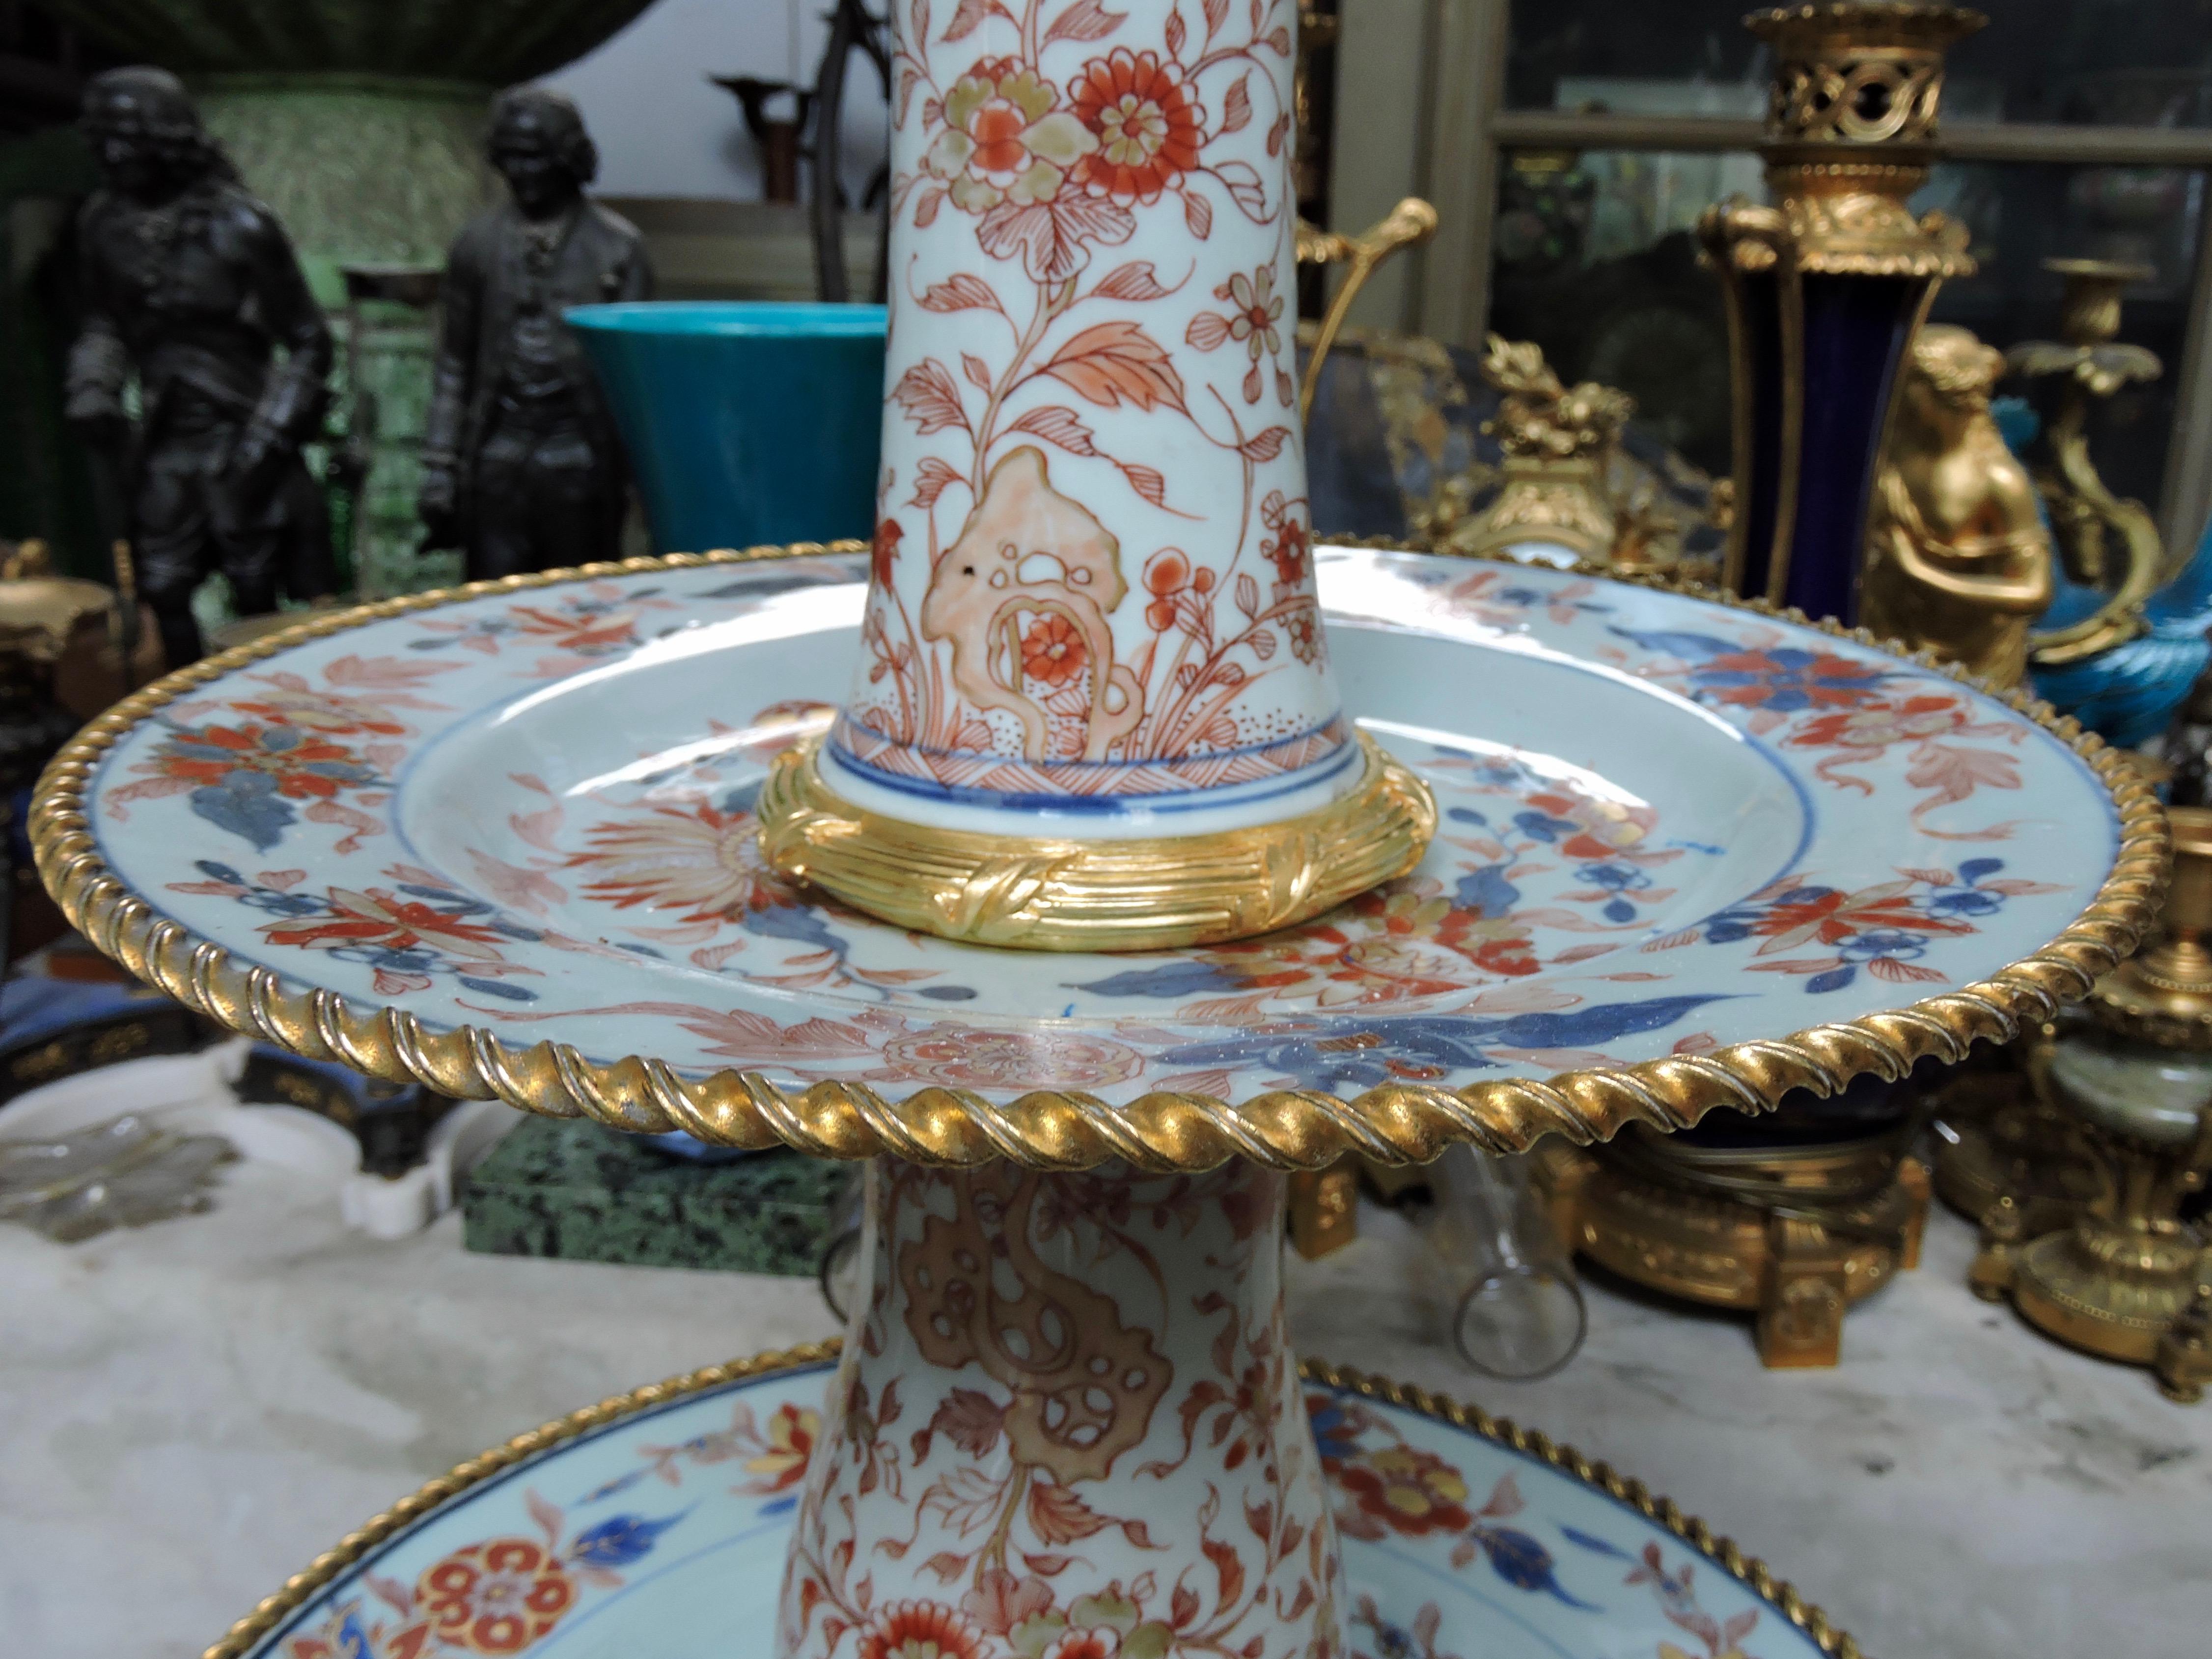 Late 19th Century 19th Century Ormolu-Mounted and 18th Century Chinese Porcelain Centrepiece